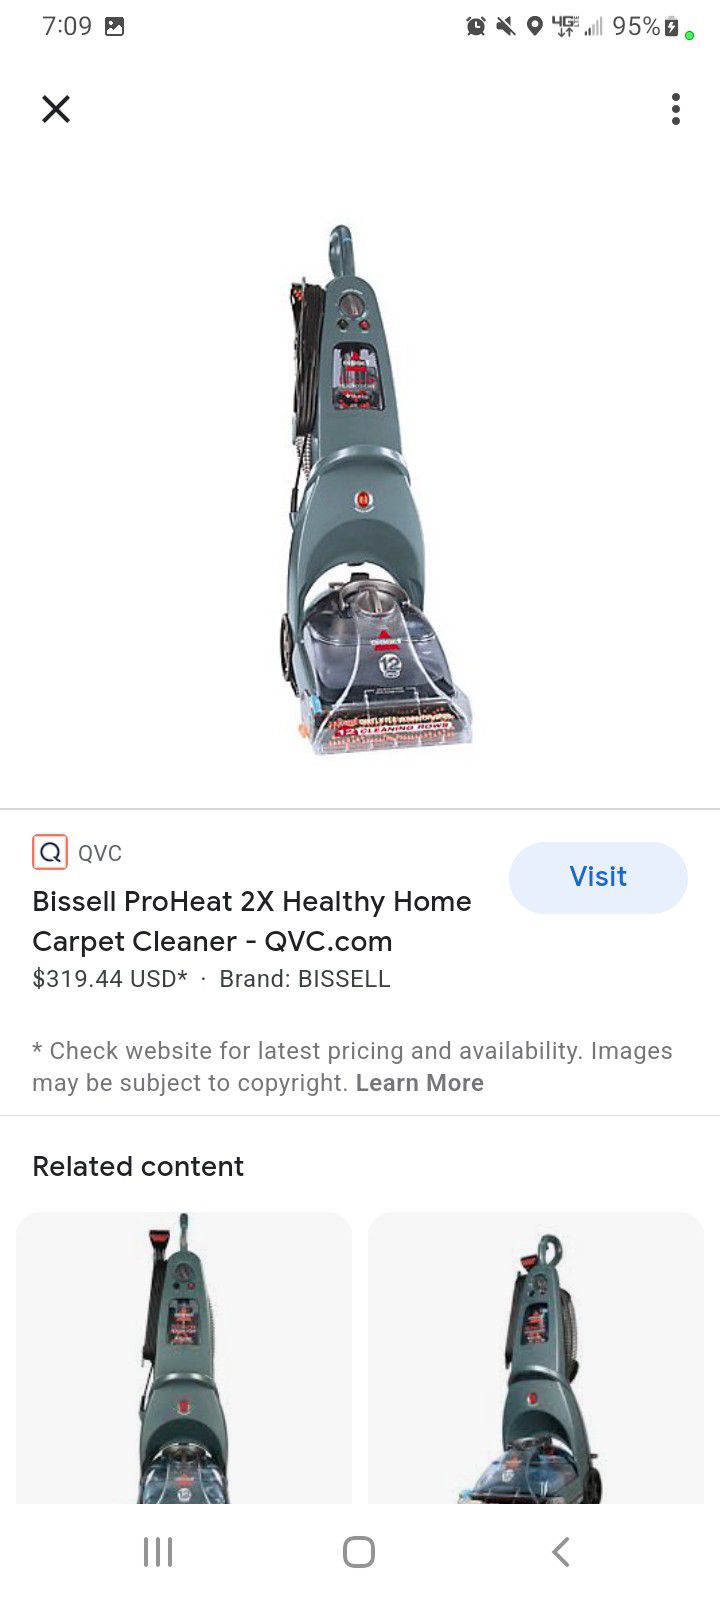 Bissell ProHeat 2X Home Carpet Cleaner